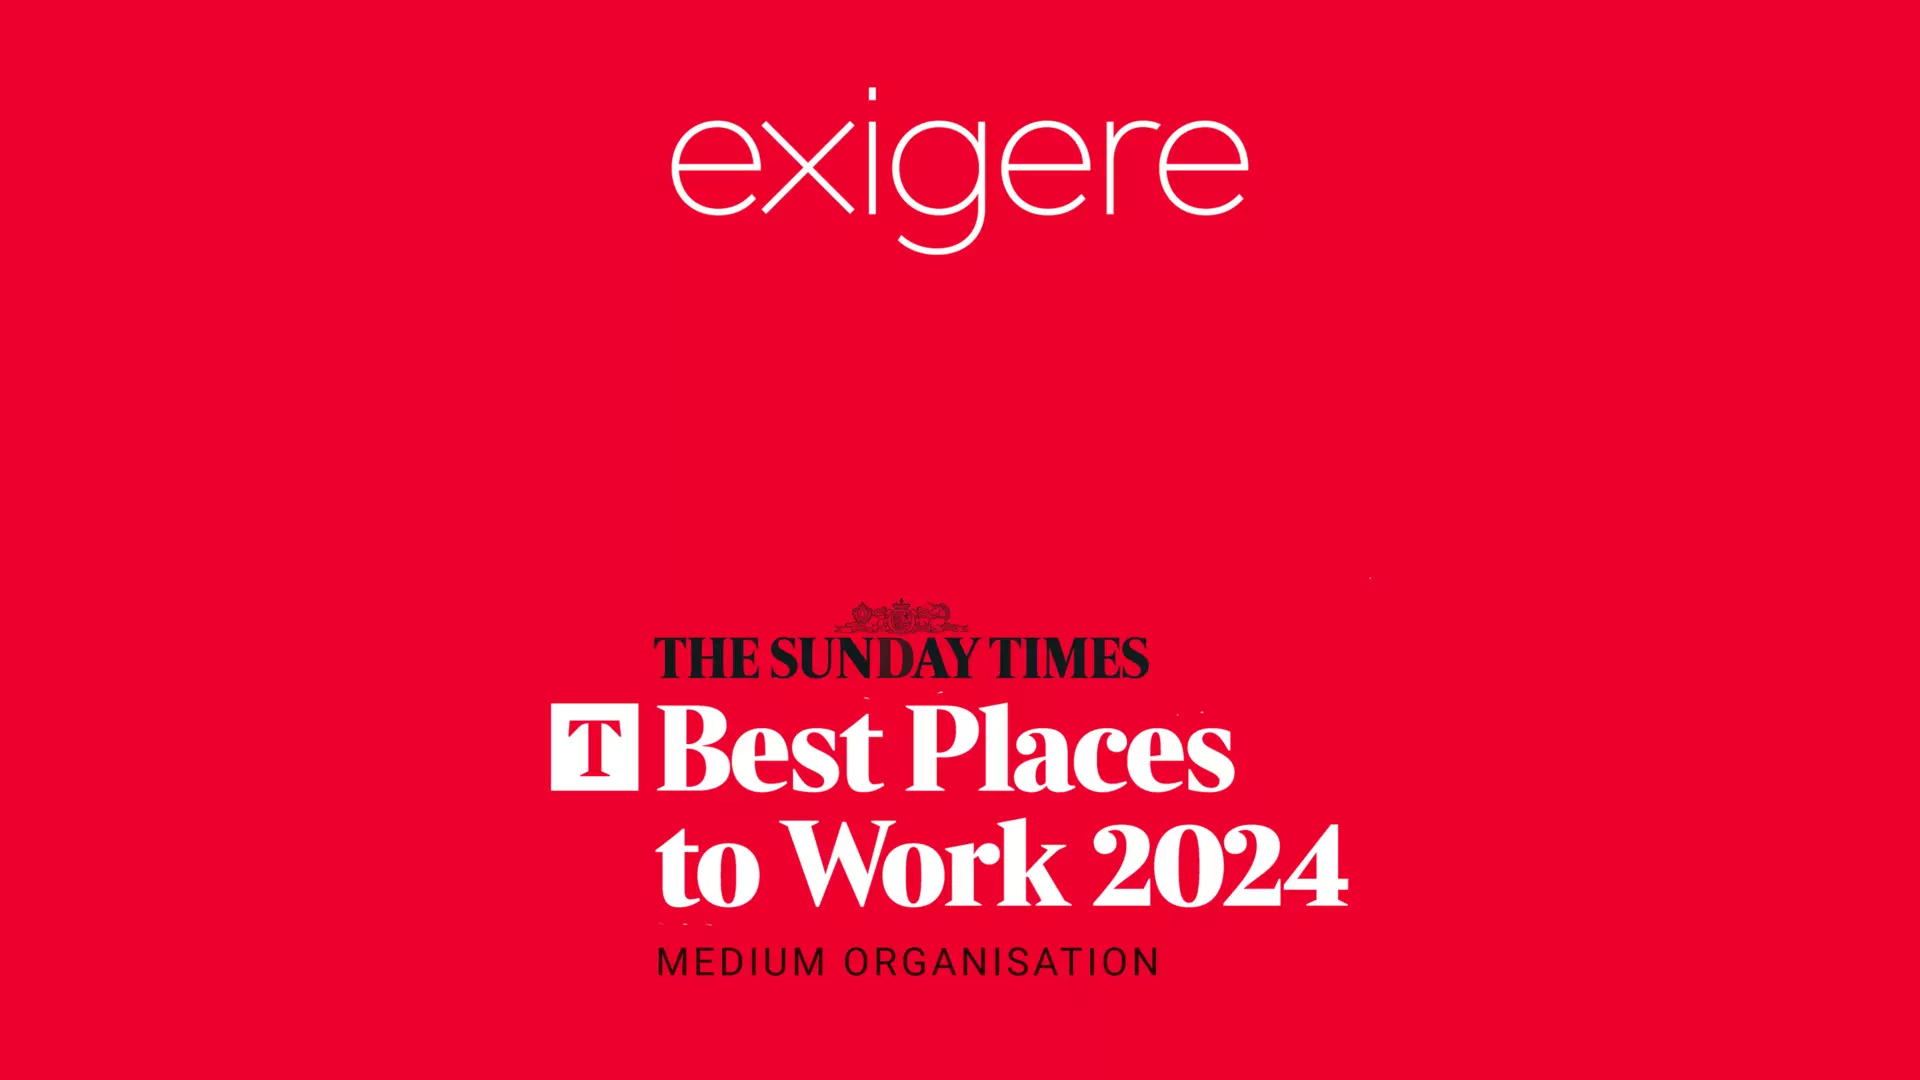 The Sunday Times Best Places to Work